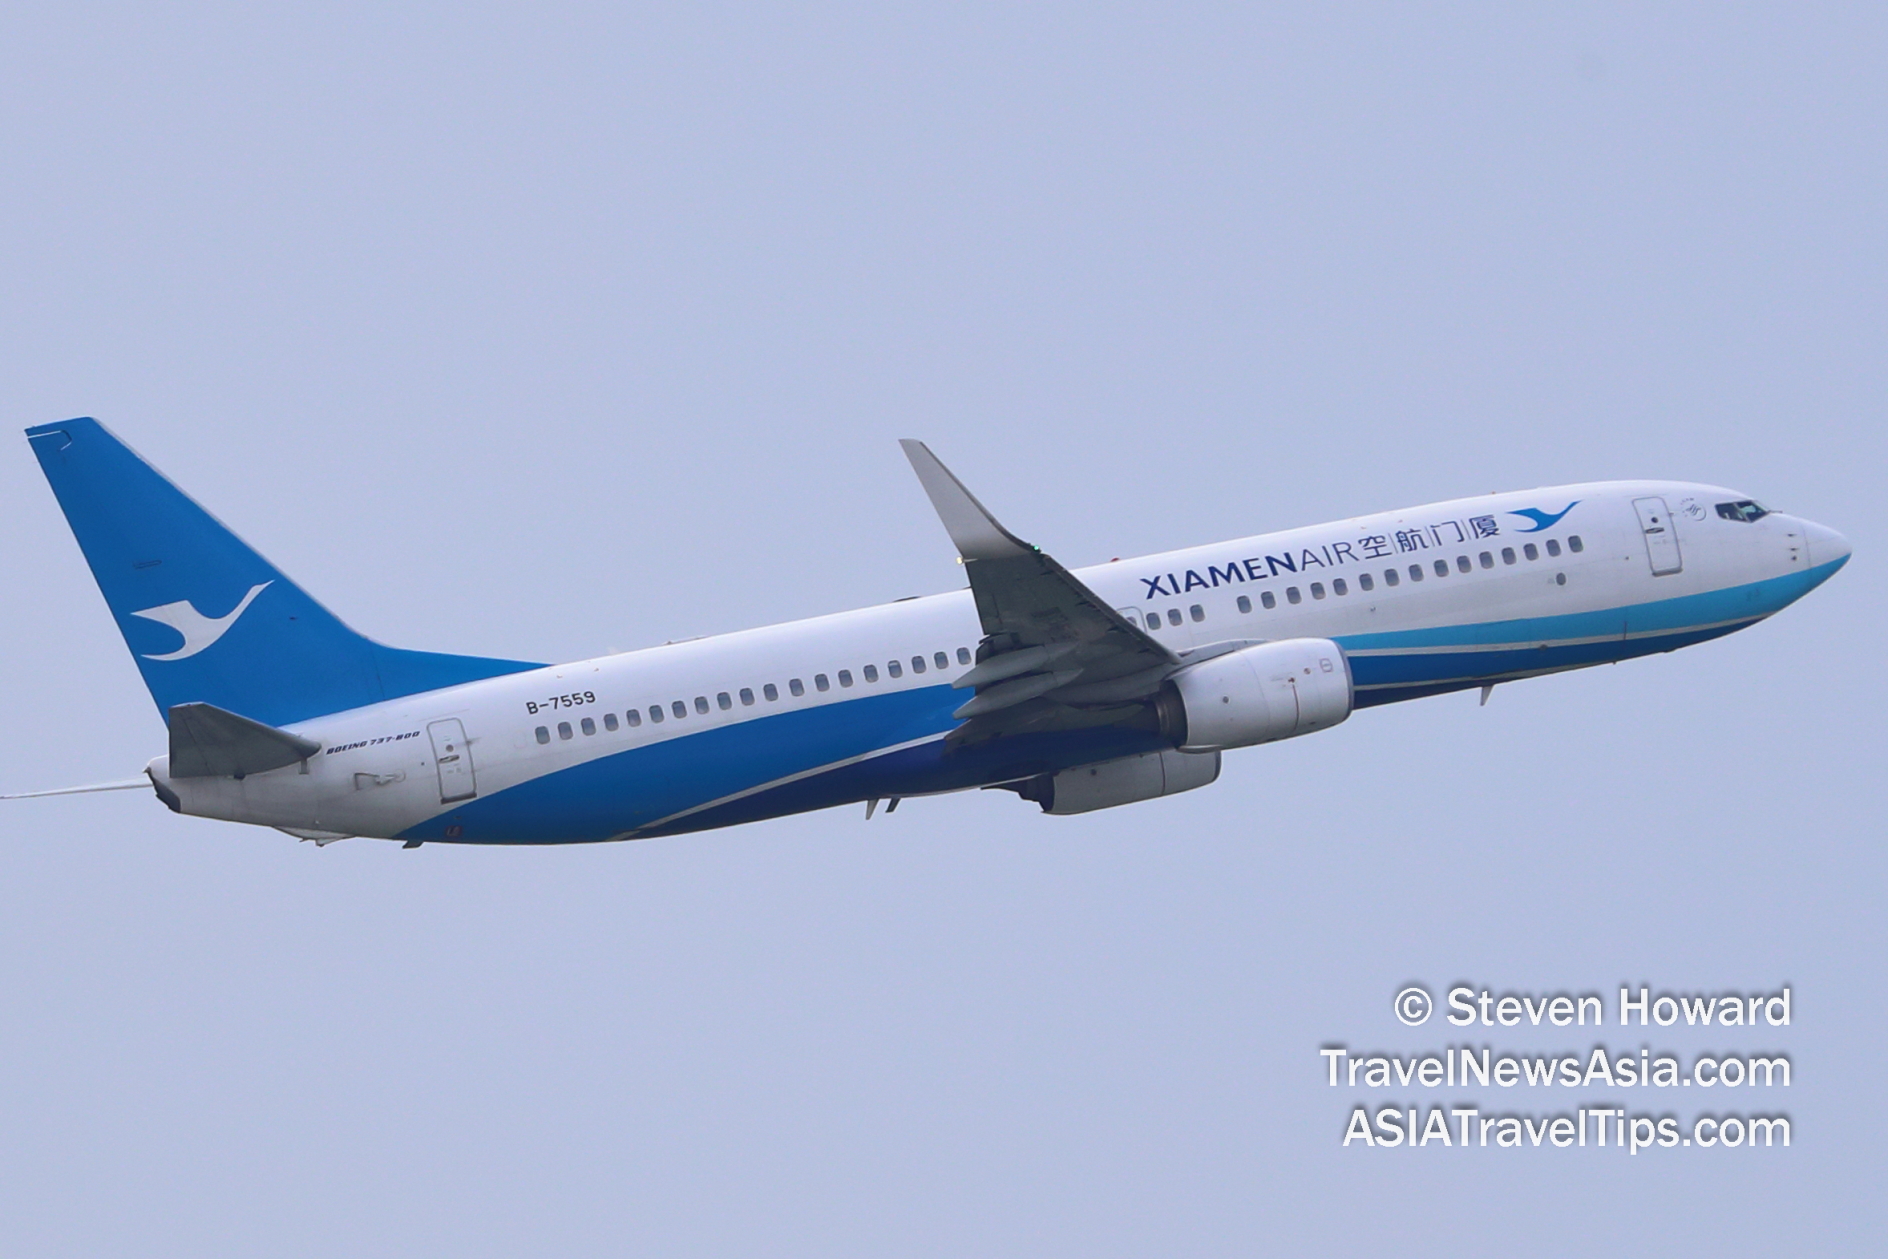 Xiamen Air B737 reg: B-7559. Picture by Steven Howard of TravelNewsAsia.com Click to enlarge.